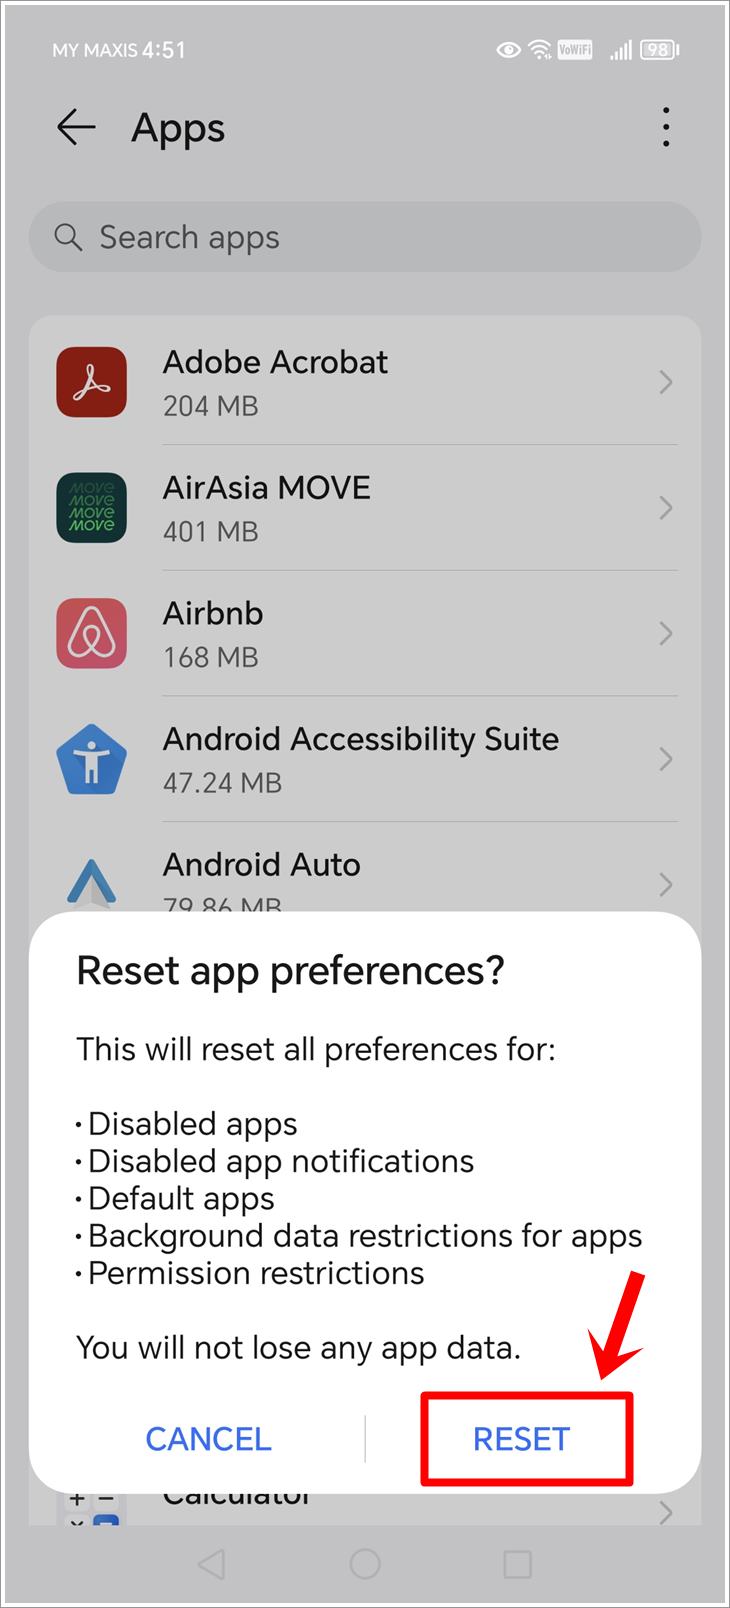 How to fix Messenger 'Waiting for Network' error: This is a screenshot of the Apps page on an Android phone. The 'Reset App Preferences' alert pop up asking for the reset confirmation. The 'Reset' button has been highlighted.